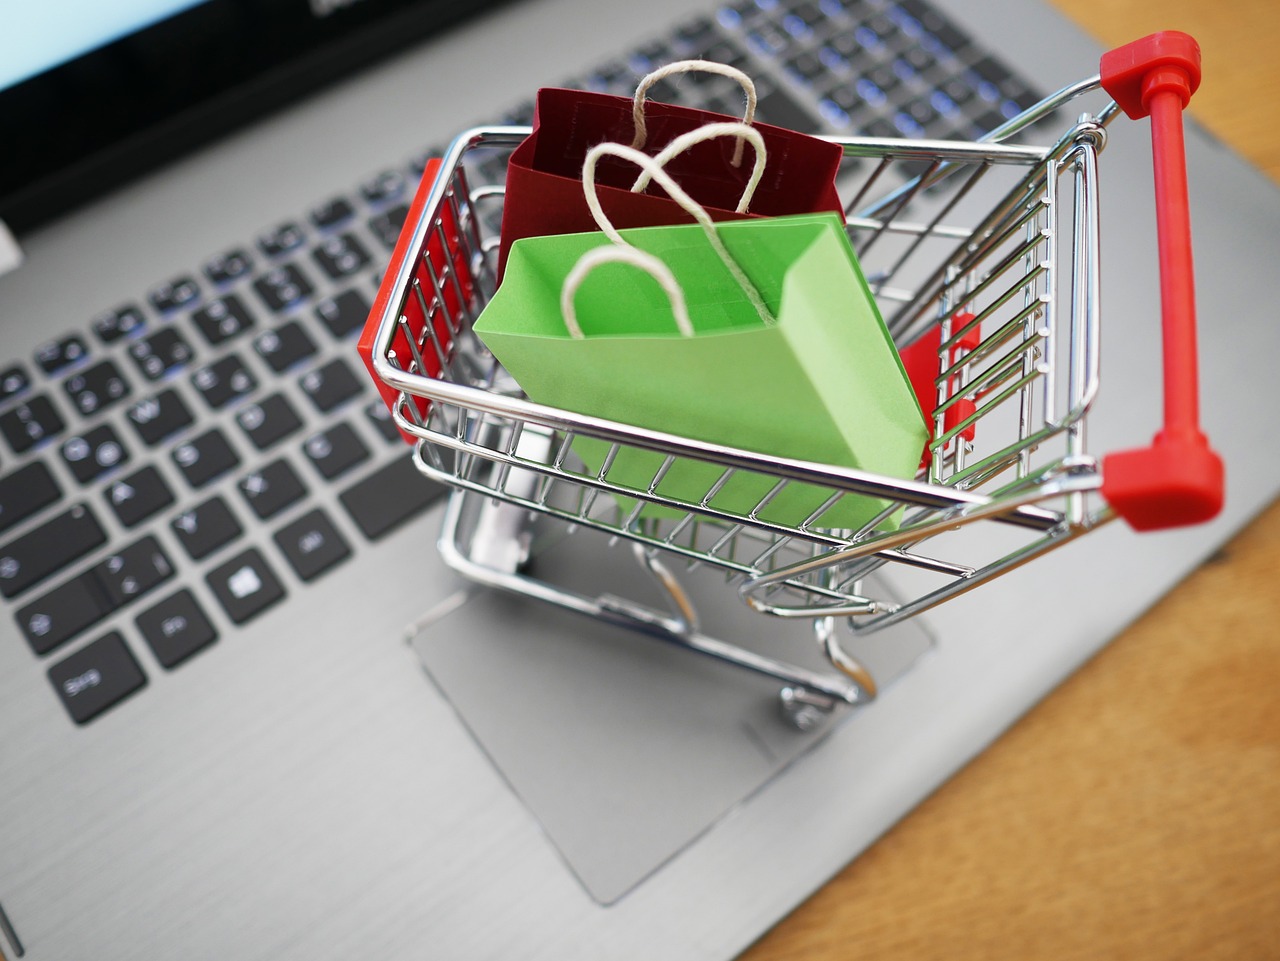 a shopping cart sitting on top of a laptop computer, shutterstock, bags, high angle close up shot, detailed product photo